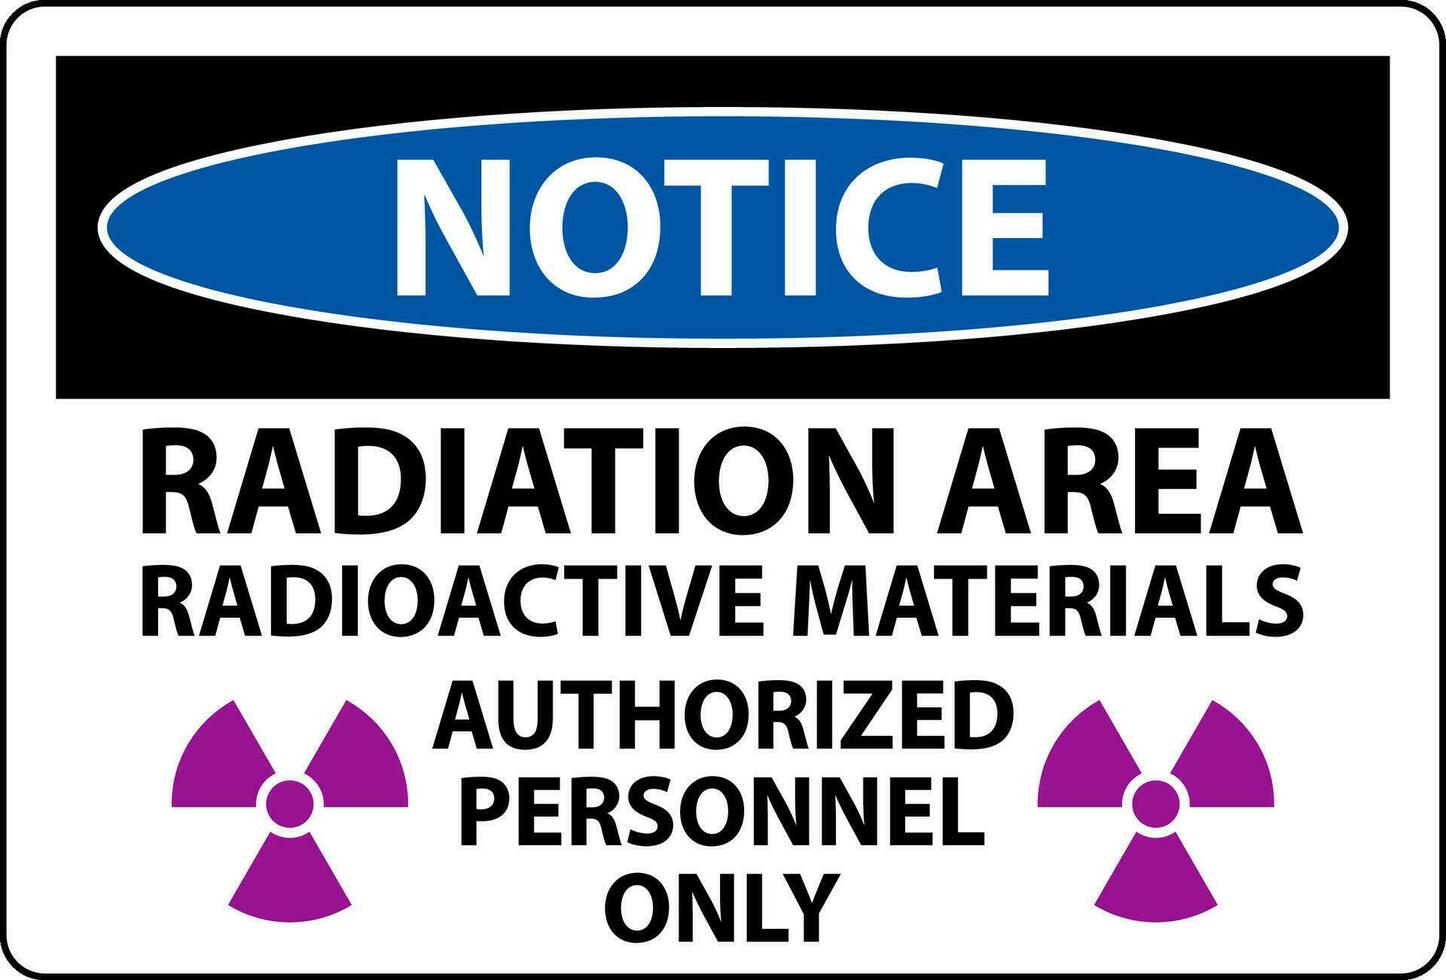 Radiation Notice Sign Caution Radiation Area, Radioactive Materials, Authorized Personnel Only vector